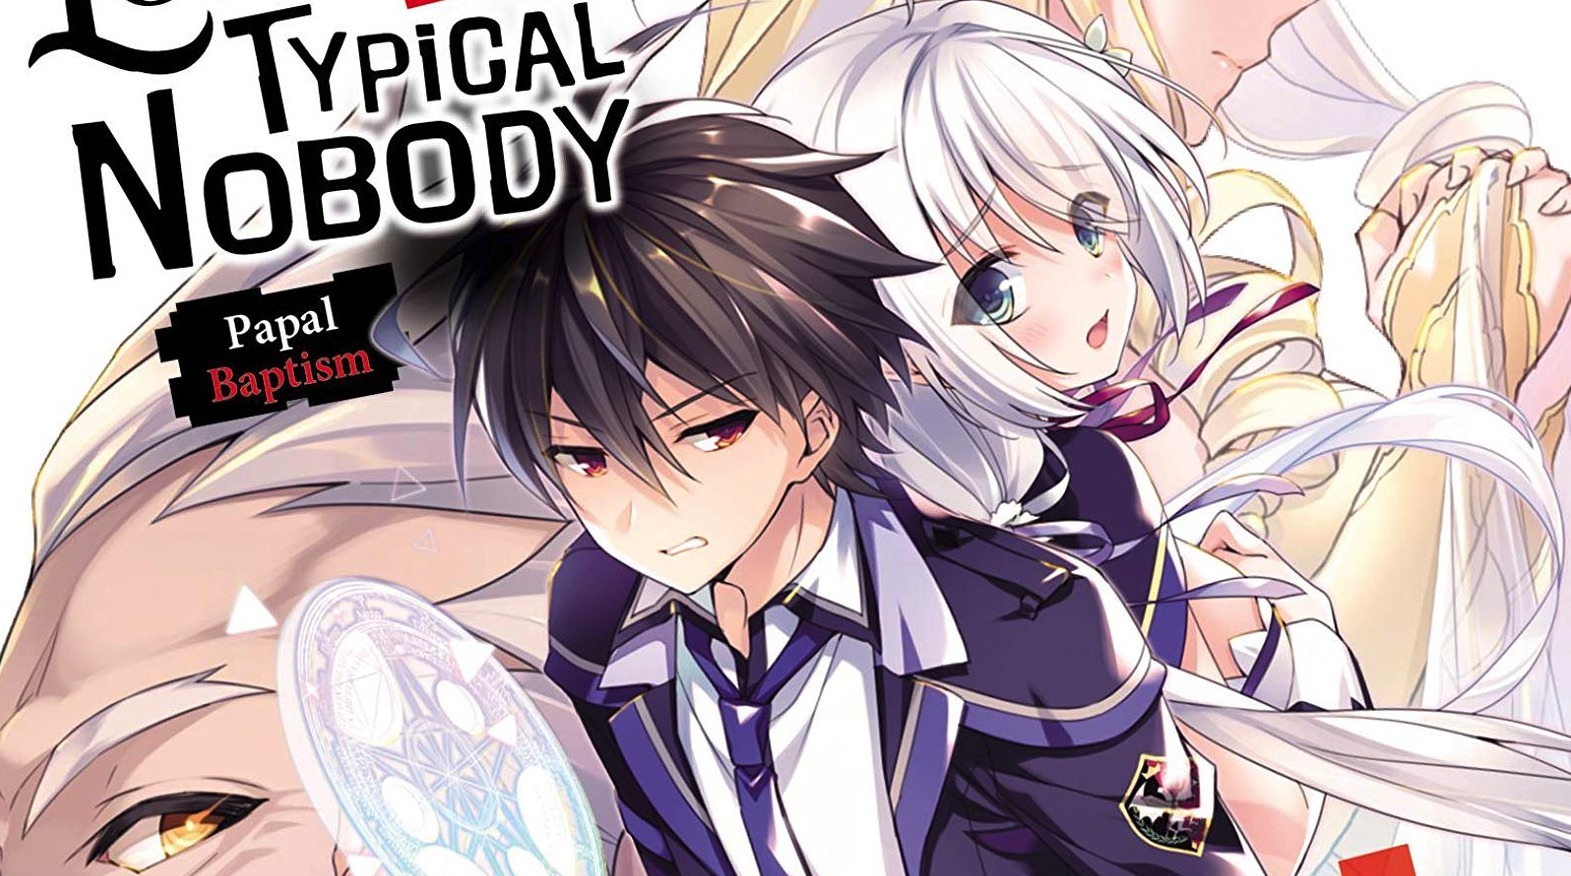 Buy Greatest Demon Lord Is Reborn as a Typical Nobody, Vol. 8 (light novel)  by Katou With Free Delivery | wordery.com